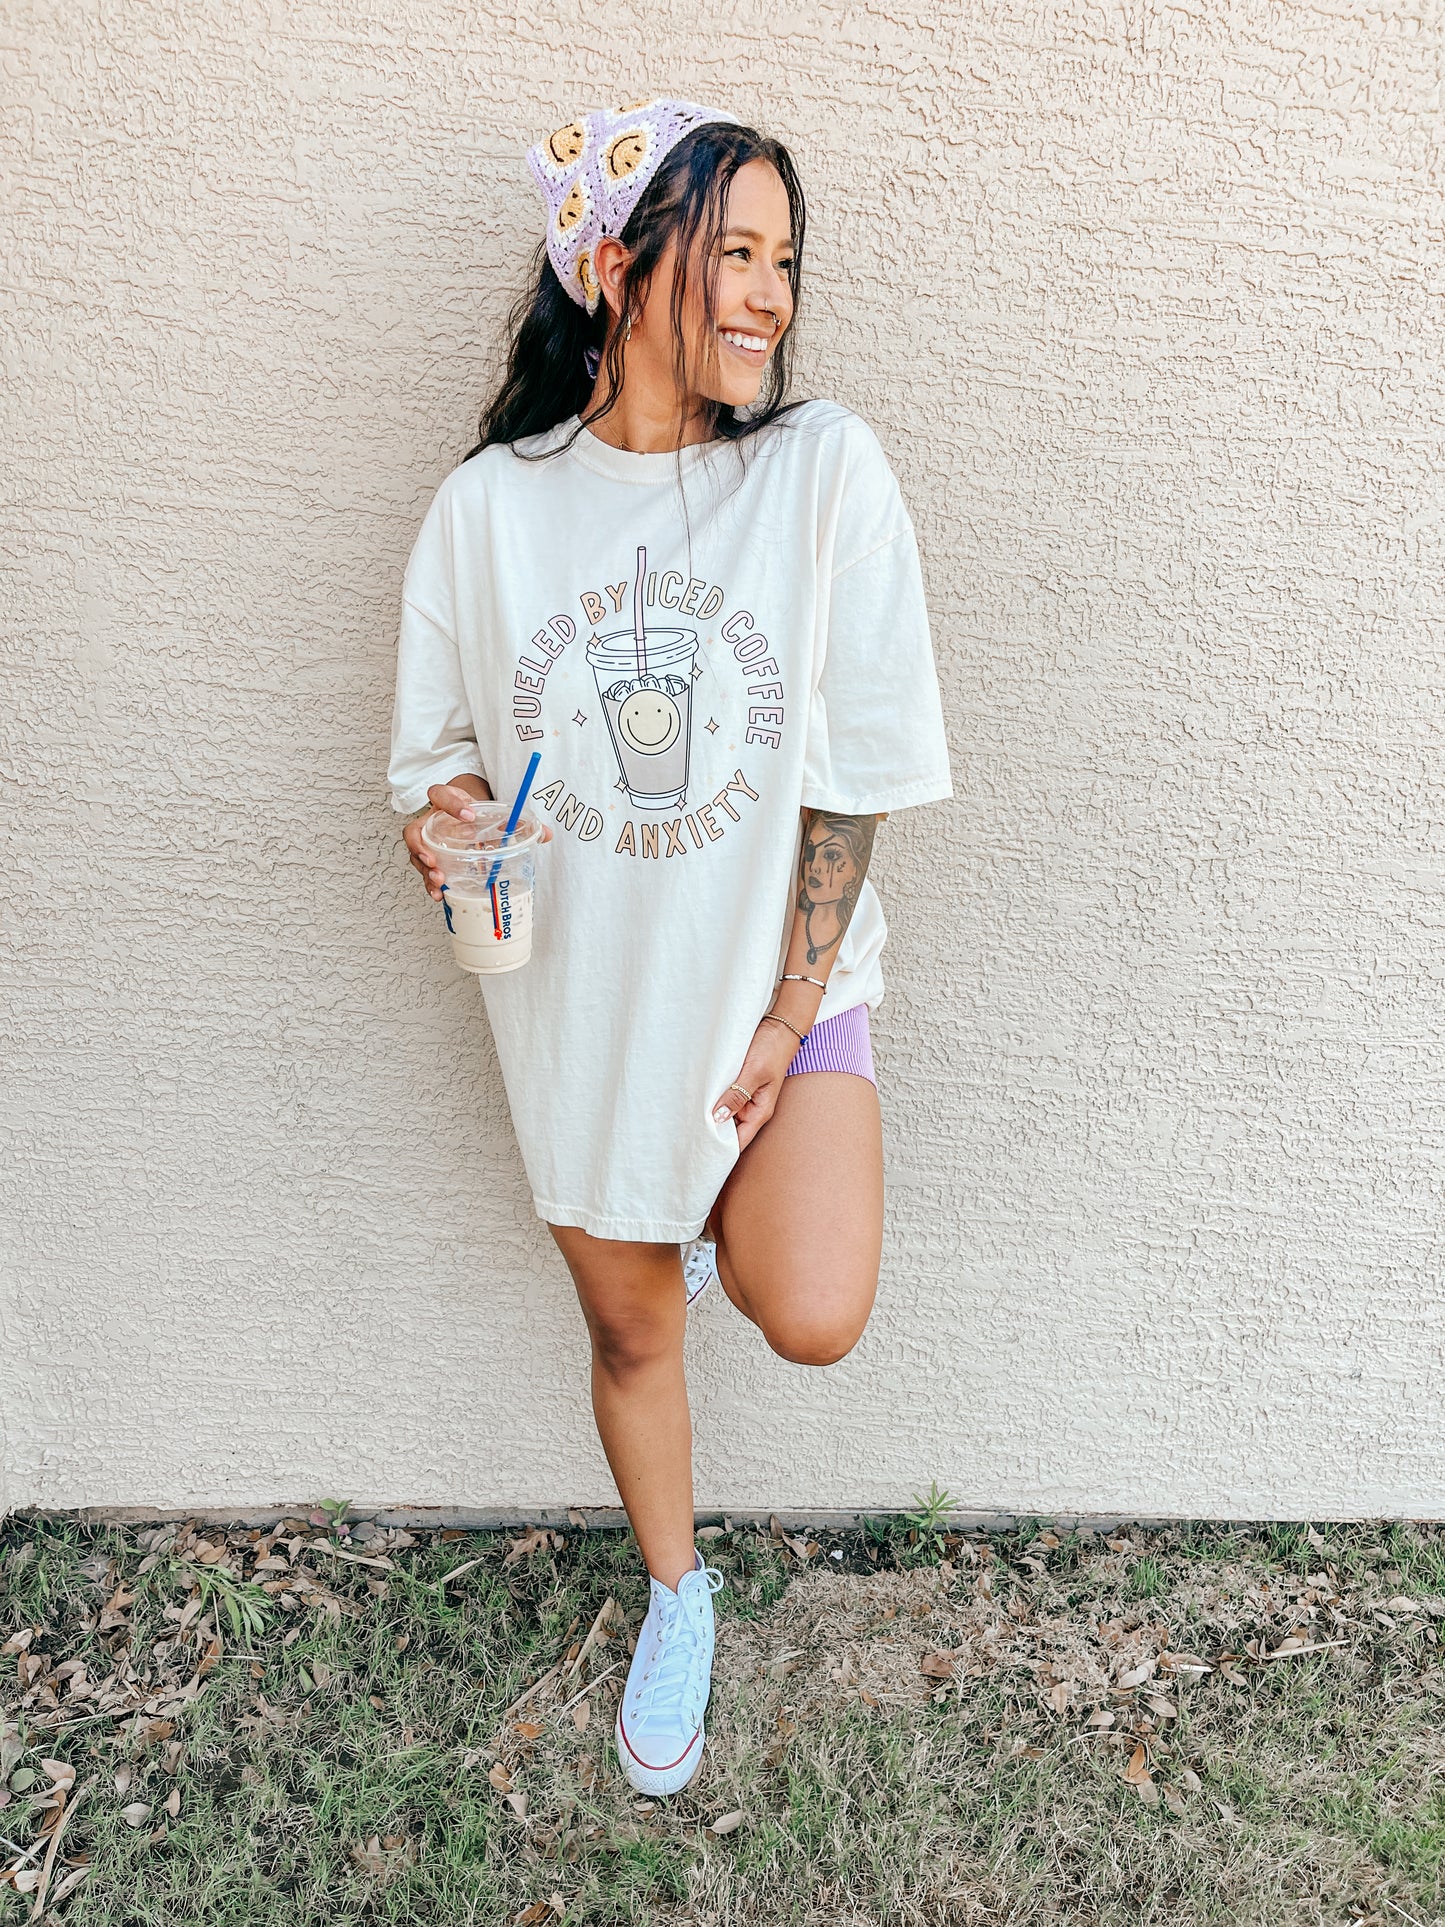 Fueled By Iced Coffee and Anxiety - Tee (Vintage White)